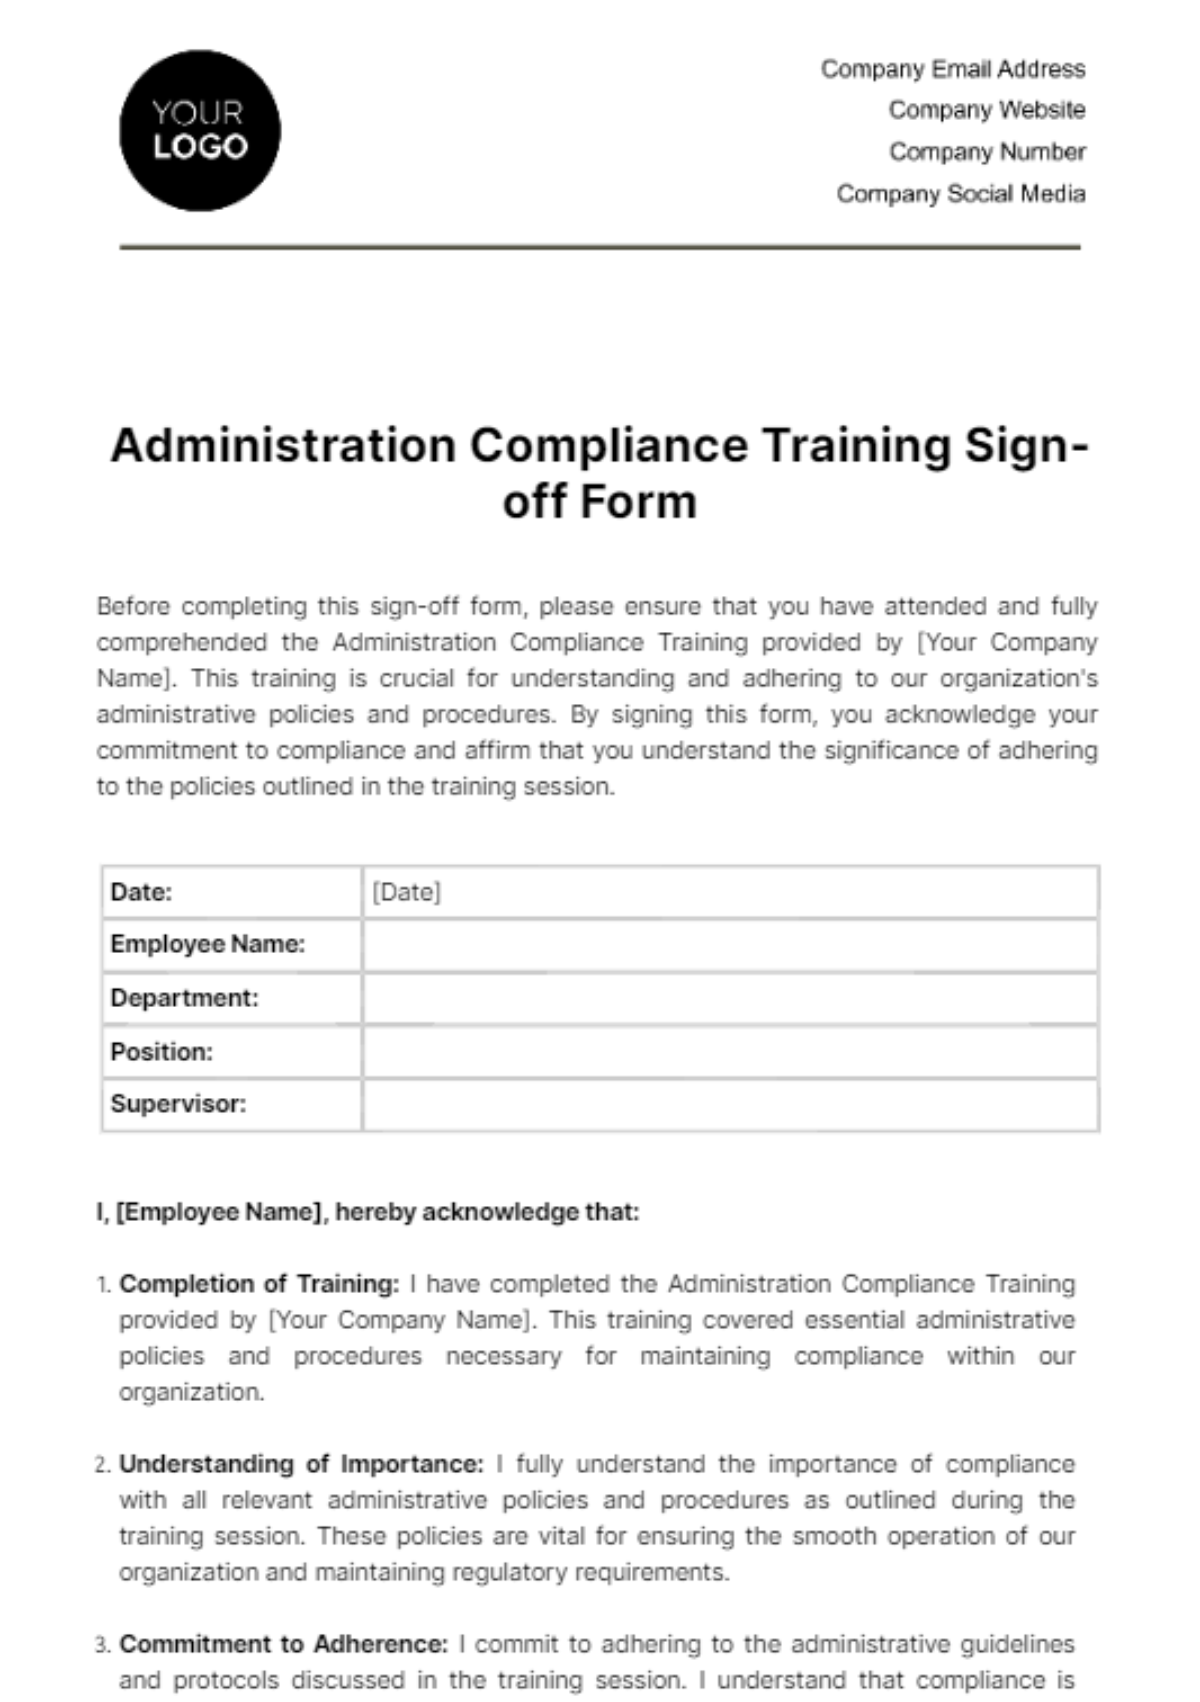 Administration Compliance Training Sign-off Form Template